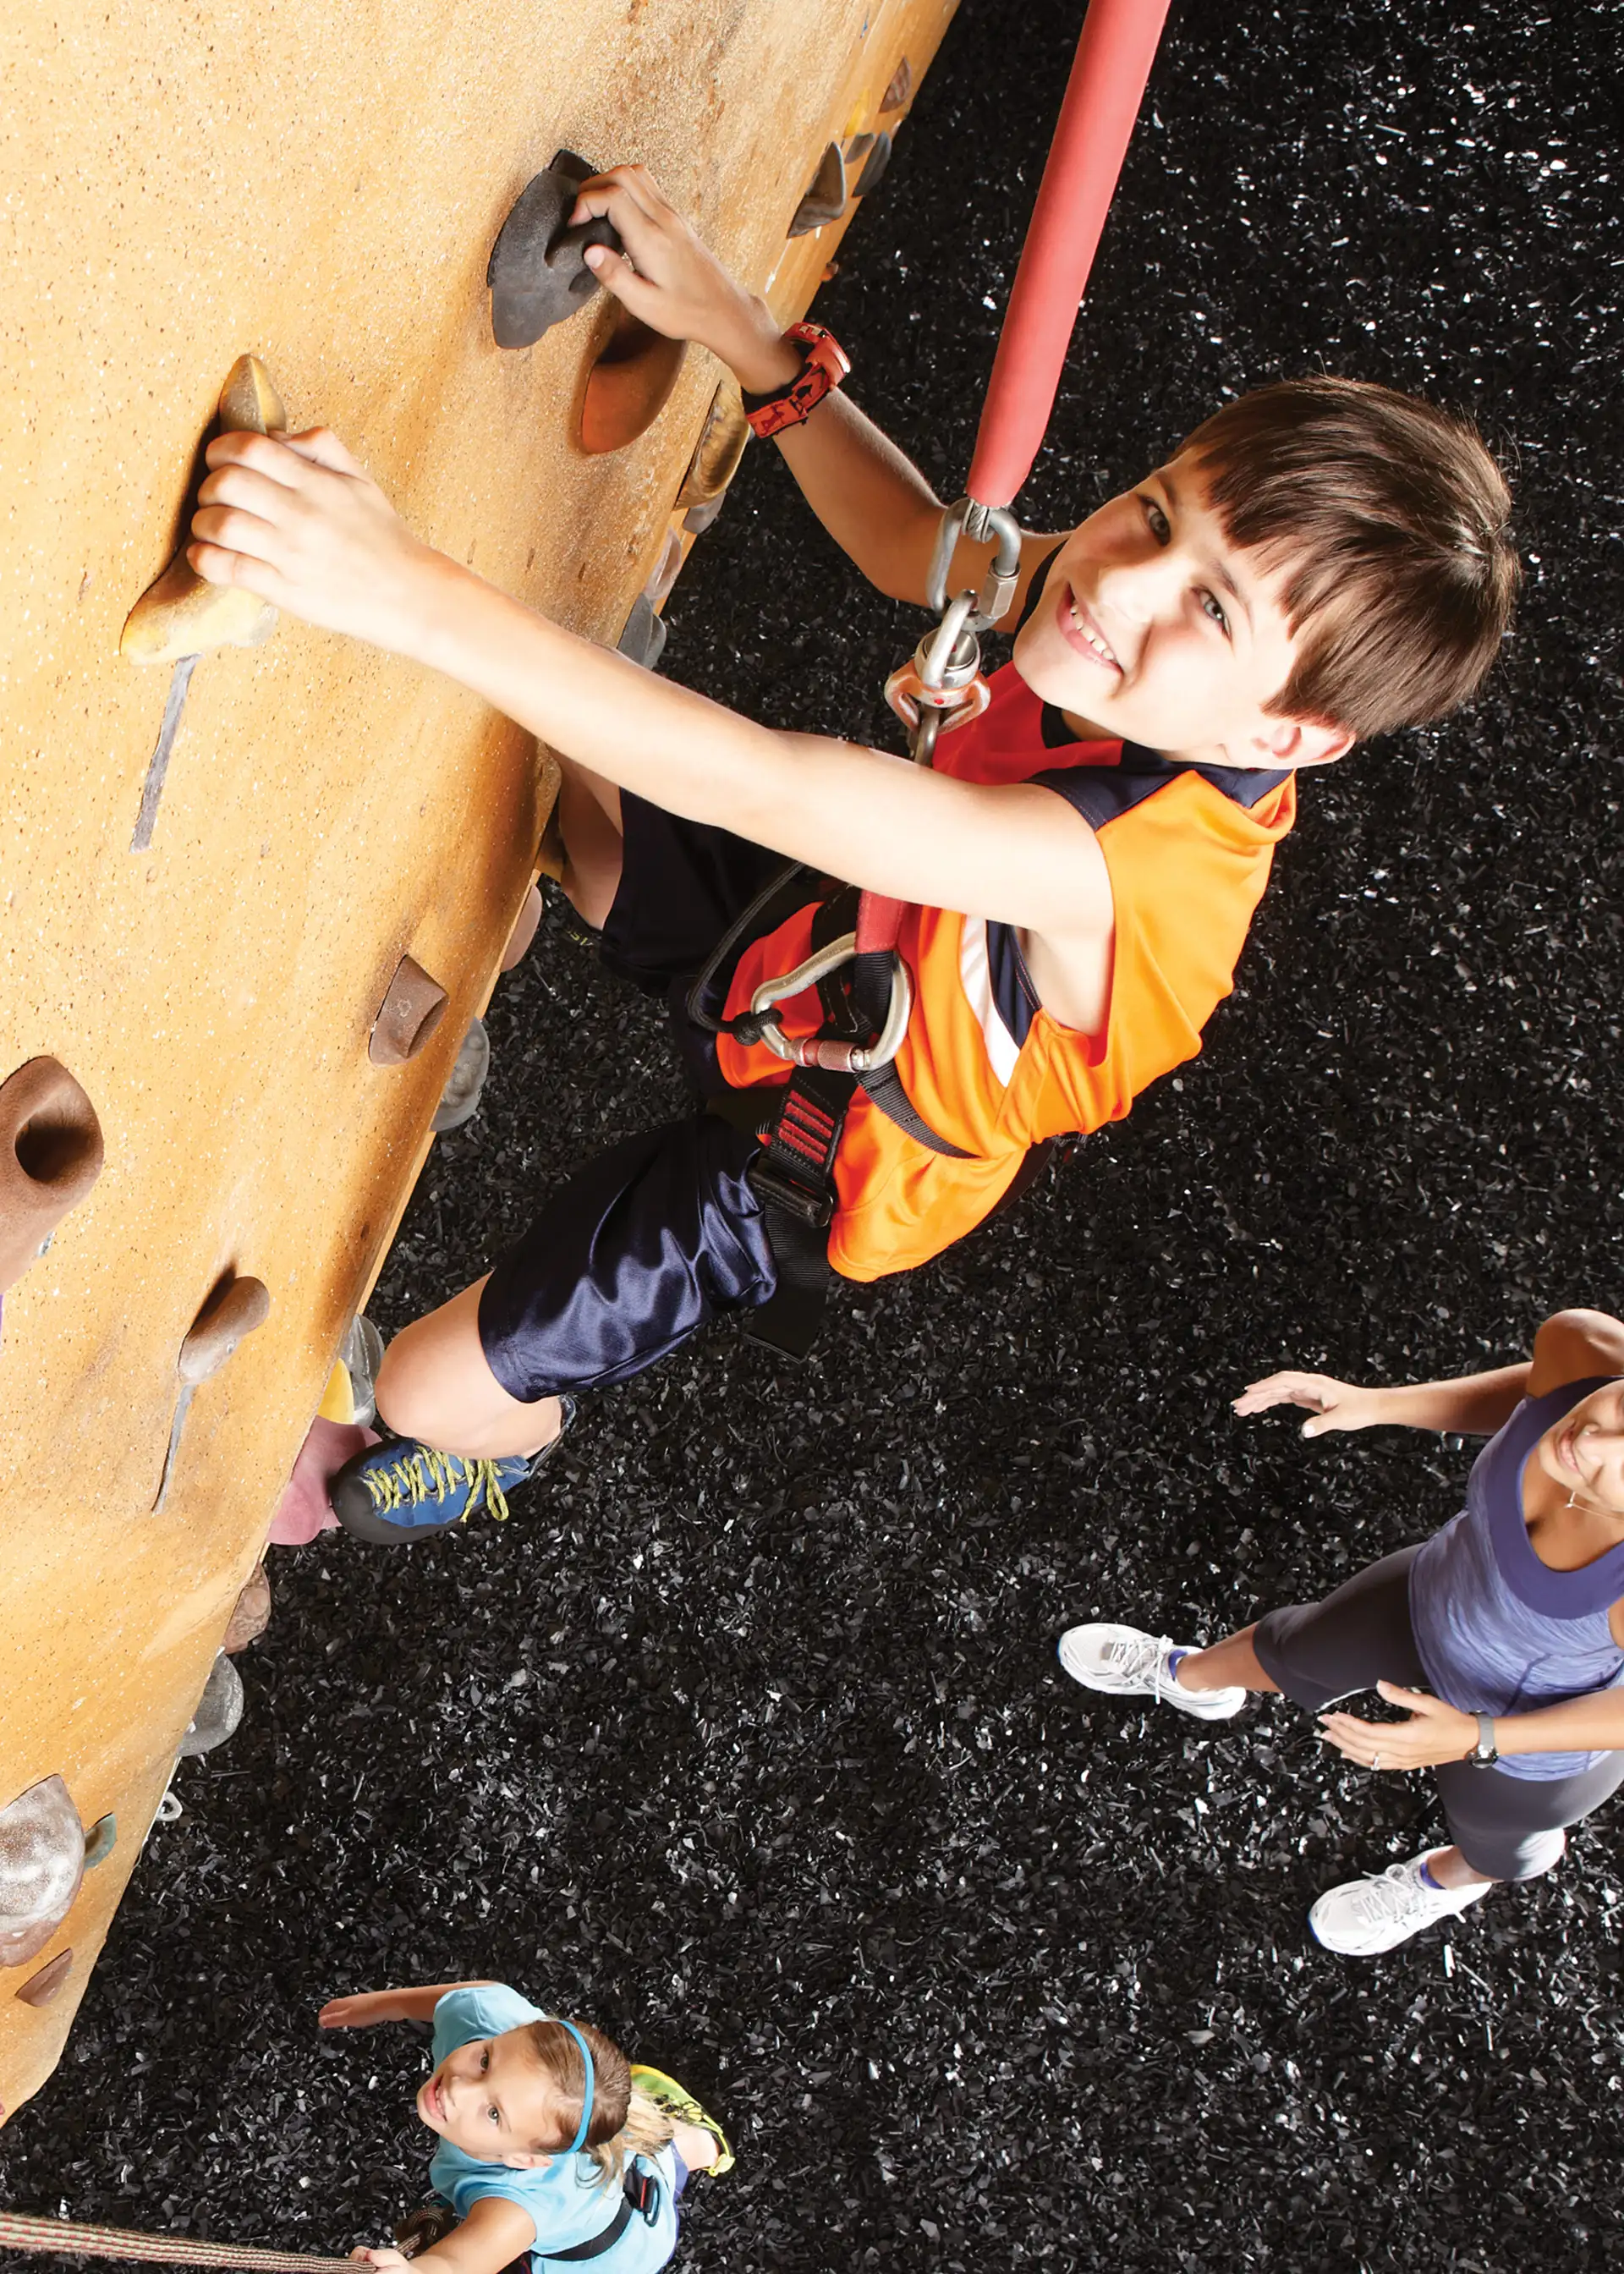 A smiling kid in a harness climbing on a rock wall